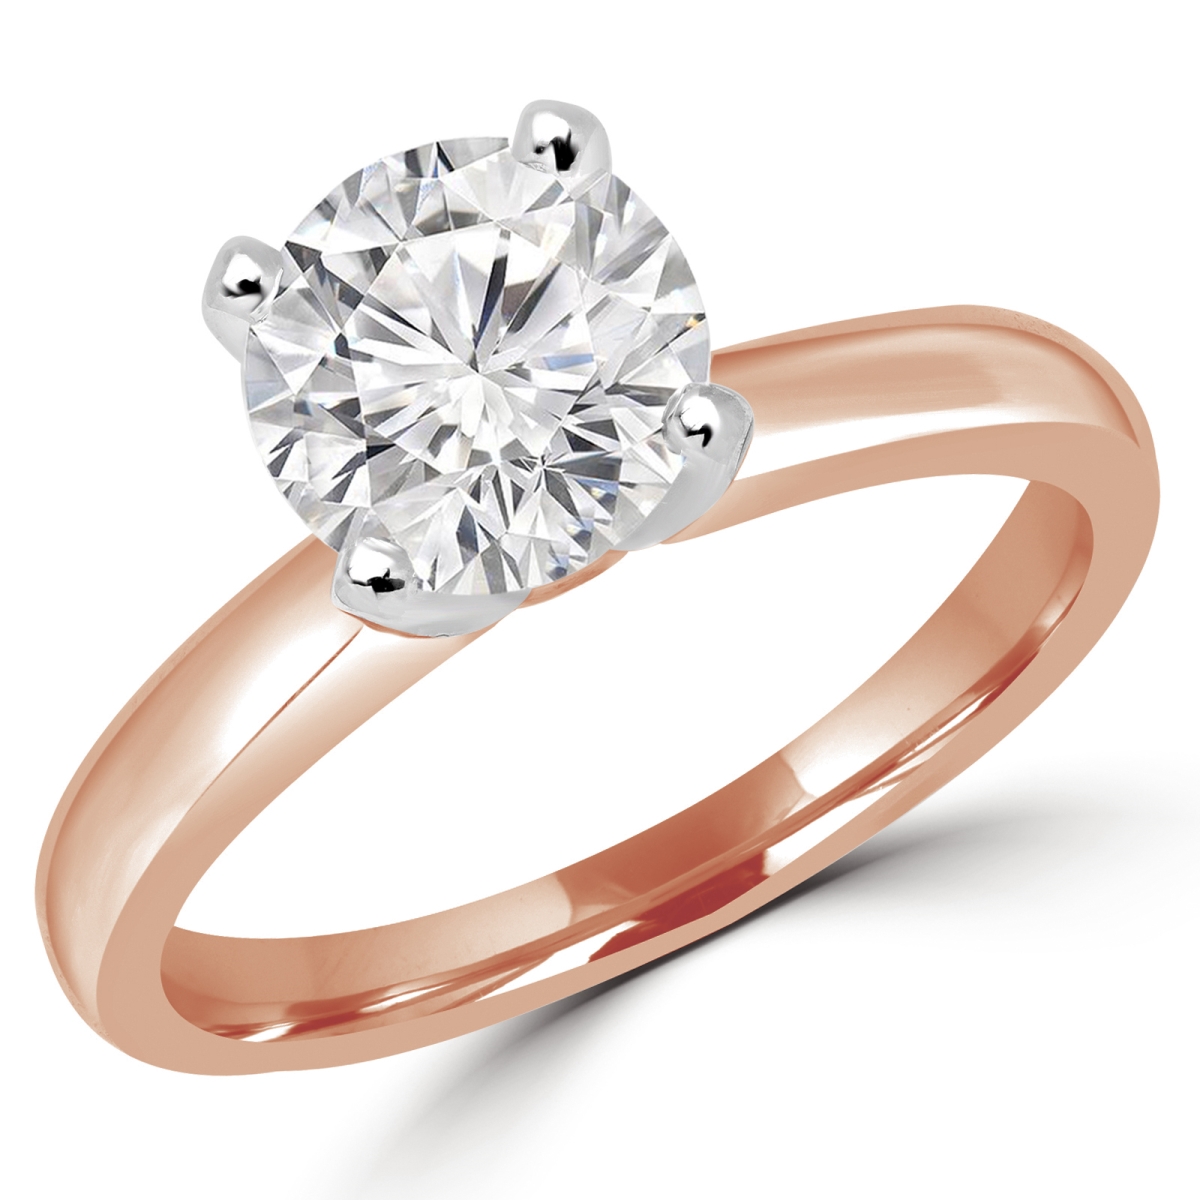 Picture of Majesty Diamonds MD180009-4.5 0.6 CT Round Diamond Solitaire Engagement Ring in 14K Rose Gold - Size 4.5